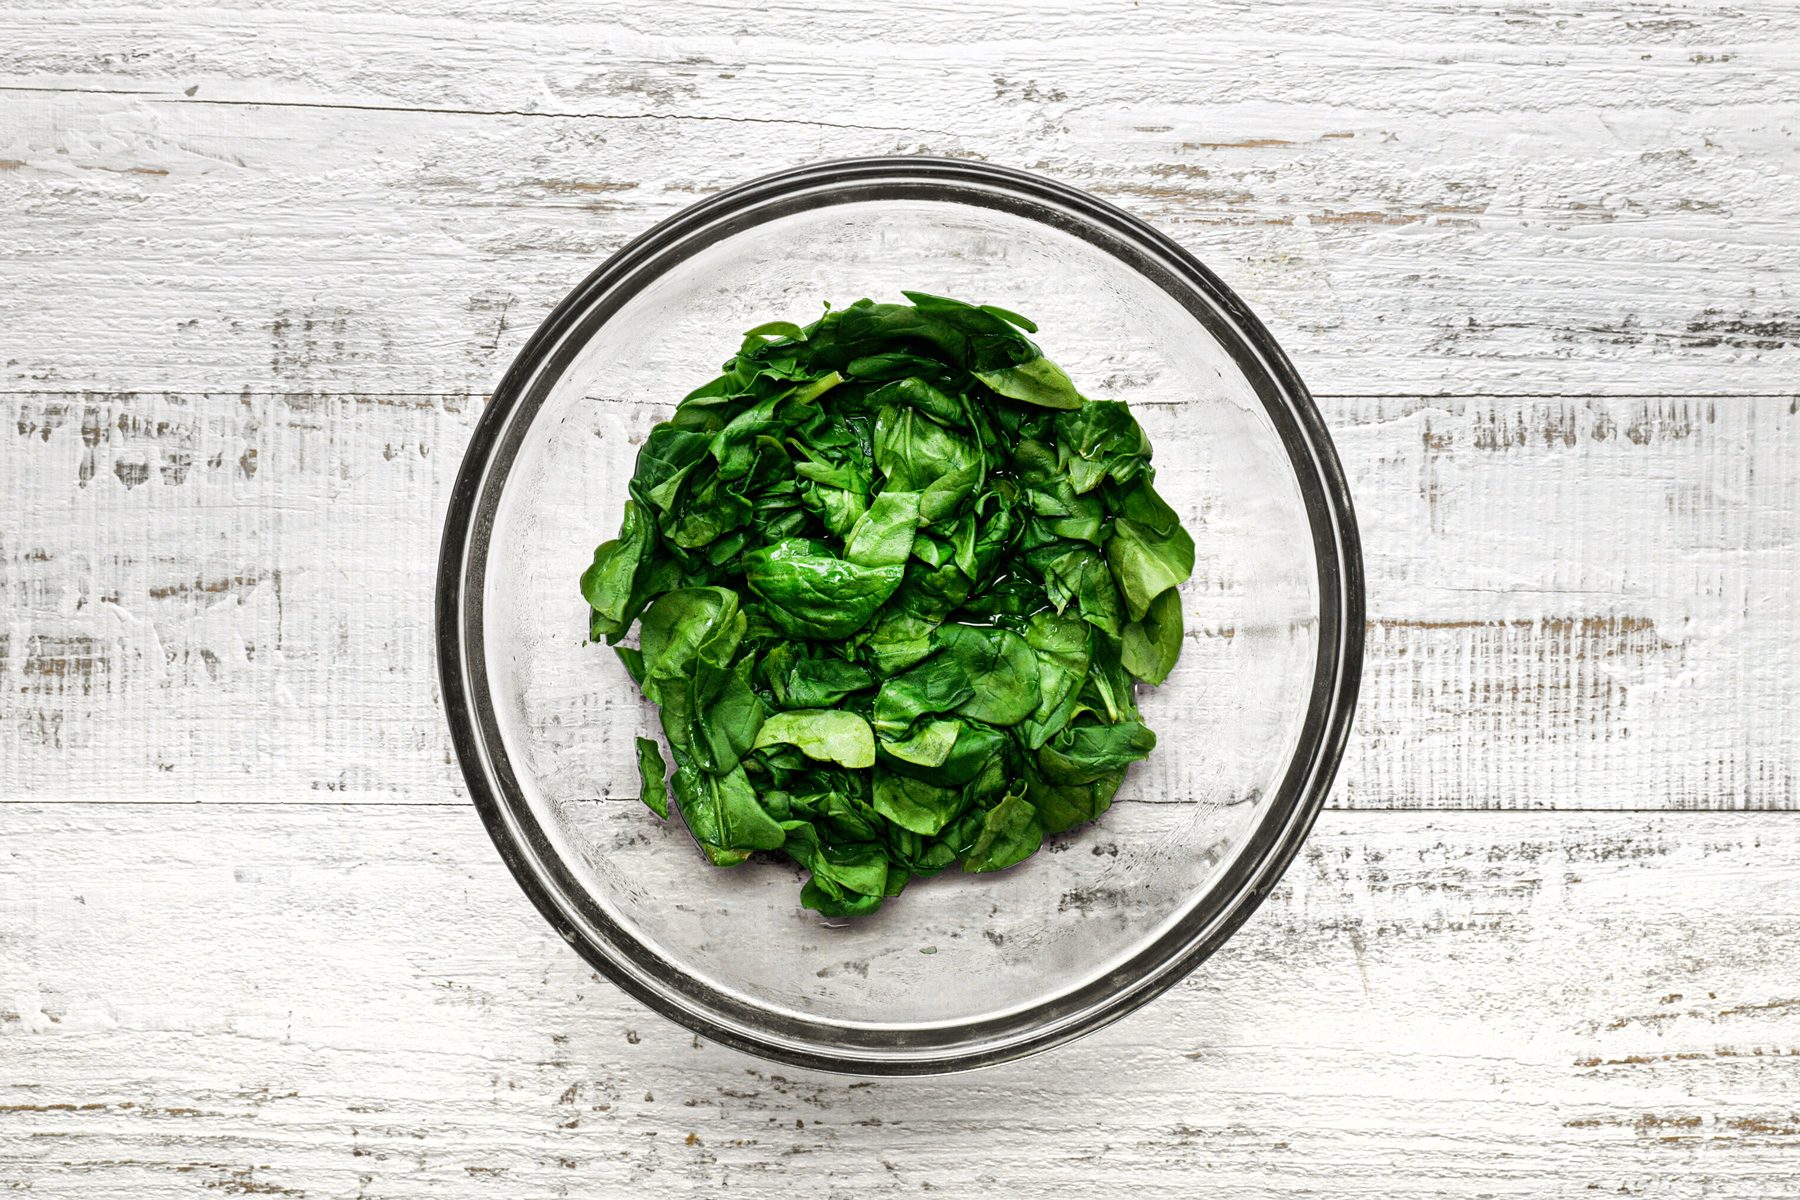 A bowl of wilted spinach over a wooden table.